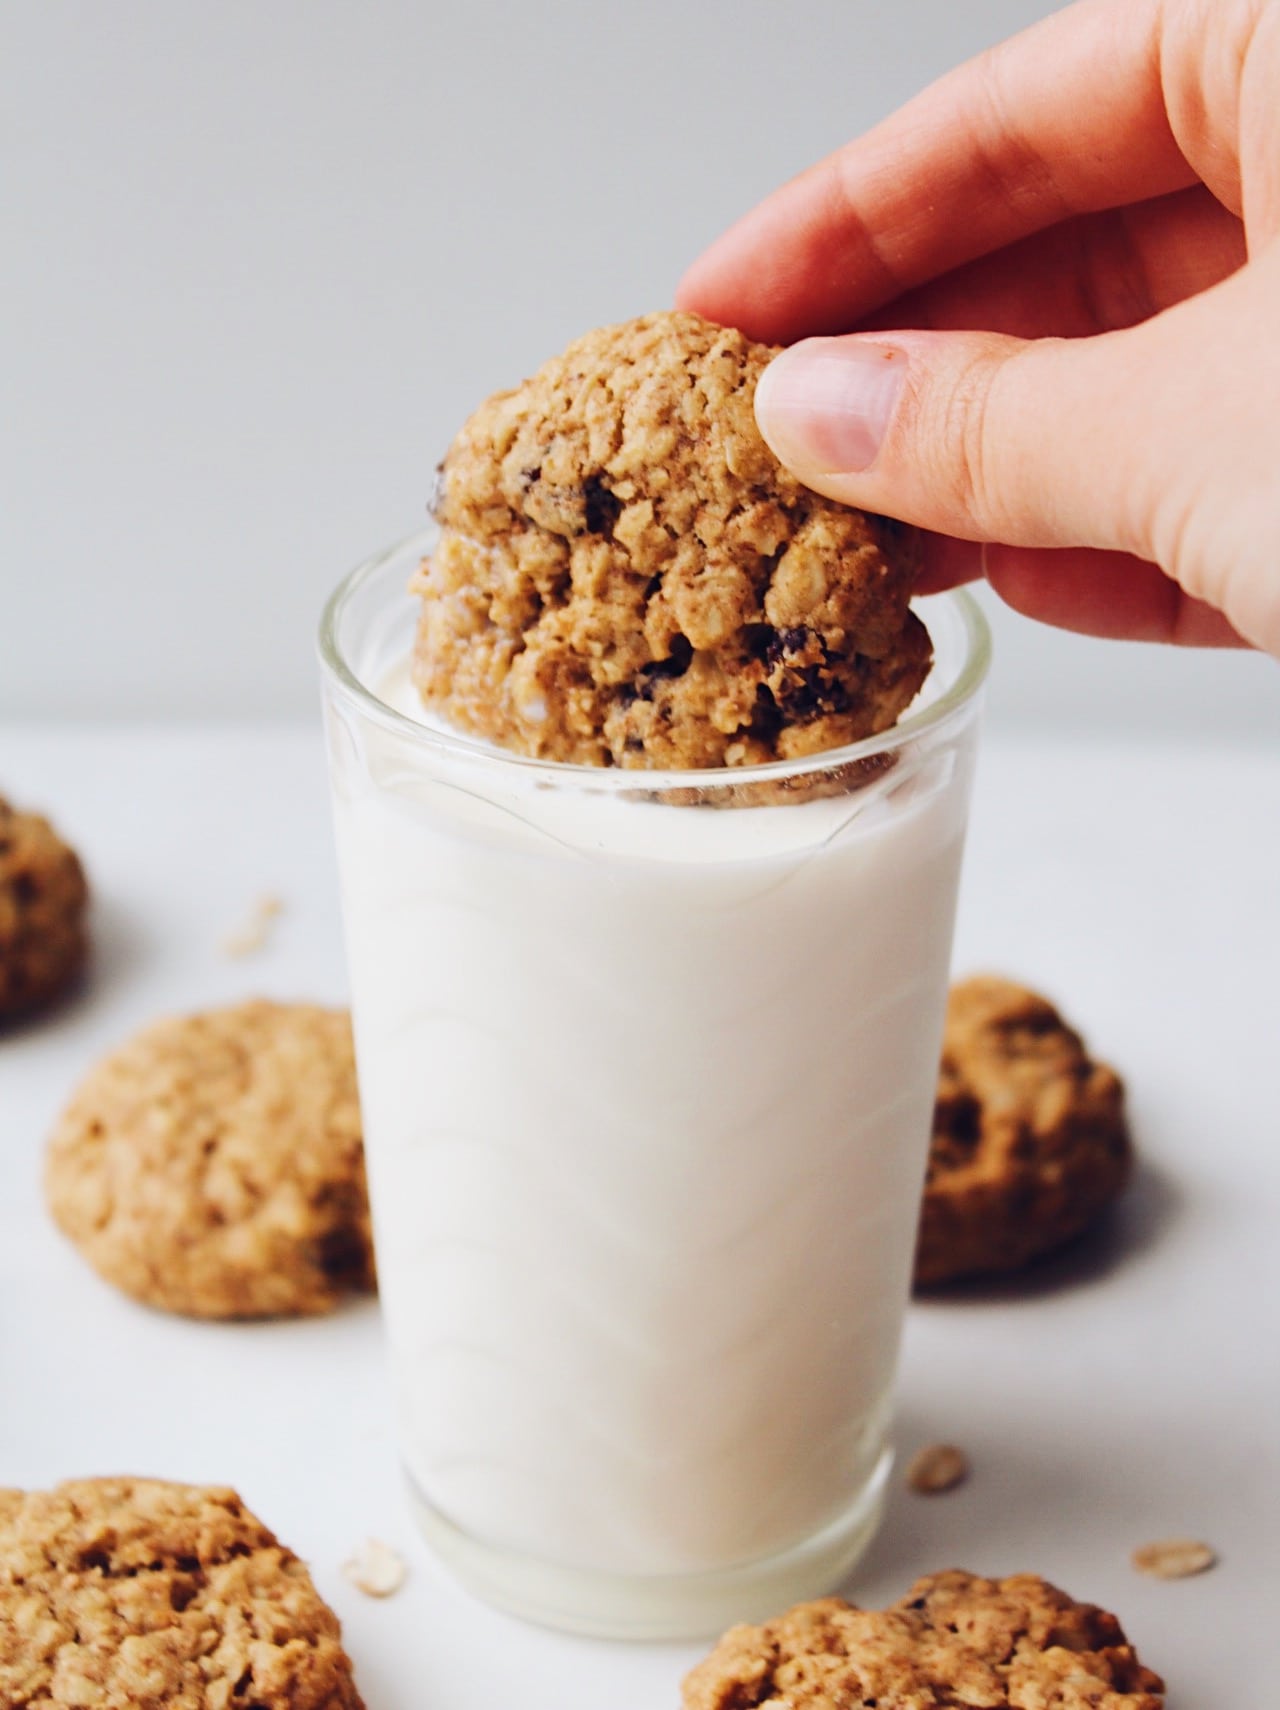 Chewy Vegan Oatmeal Cookies by Hannah Magee RD. These vegan oatmeal cookies are a better-for-you take on the traditional oatmeal cookie. They're sweet and chewy with half the sugar and whole grains.